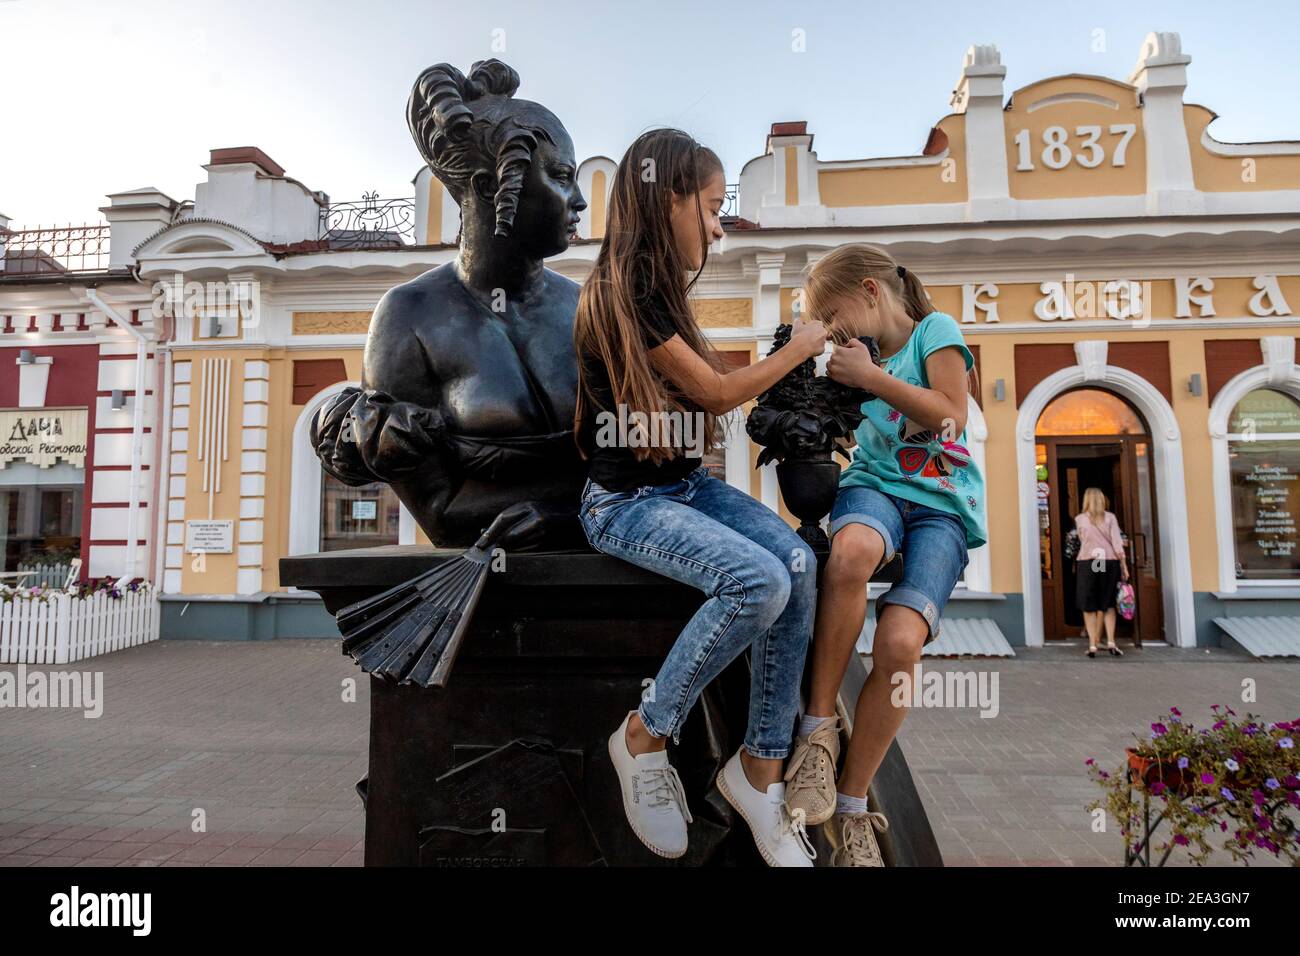 Tambov, Russia. 24th of August, 2018 View of bronze sculpture to the The Tambov Treasurer's Wife (the heroine of the poem by Mikhail Lermontov) by the Moscow sculptor Alexander Mironov at the cafe 'Skazka' (on the background) on Kommunalnaya Street in Tambov city, Russia Stock Photo